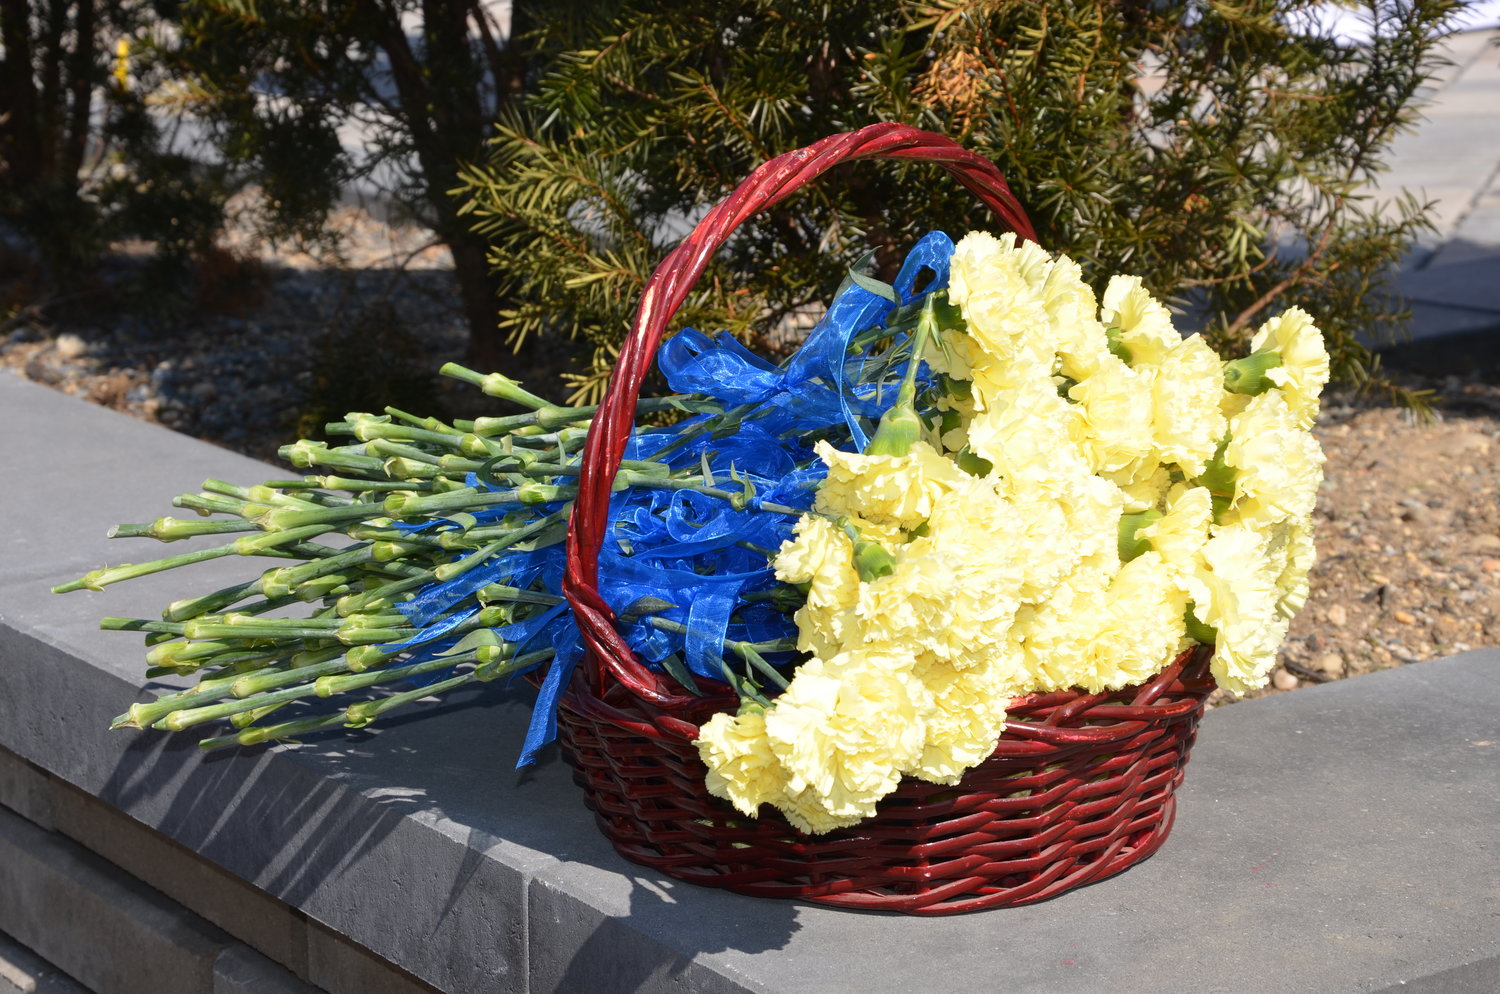 Rough 400 yellow carnations were also distributed to the guests at the ceremony to celebrate hospital staff and remember those that were lost to the COVID-19 pandemic.